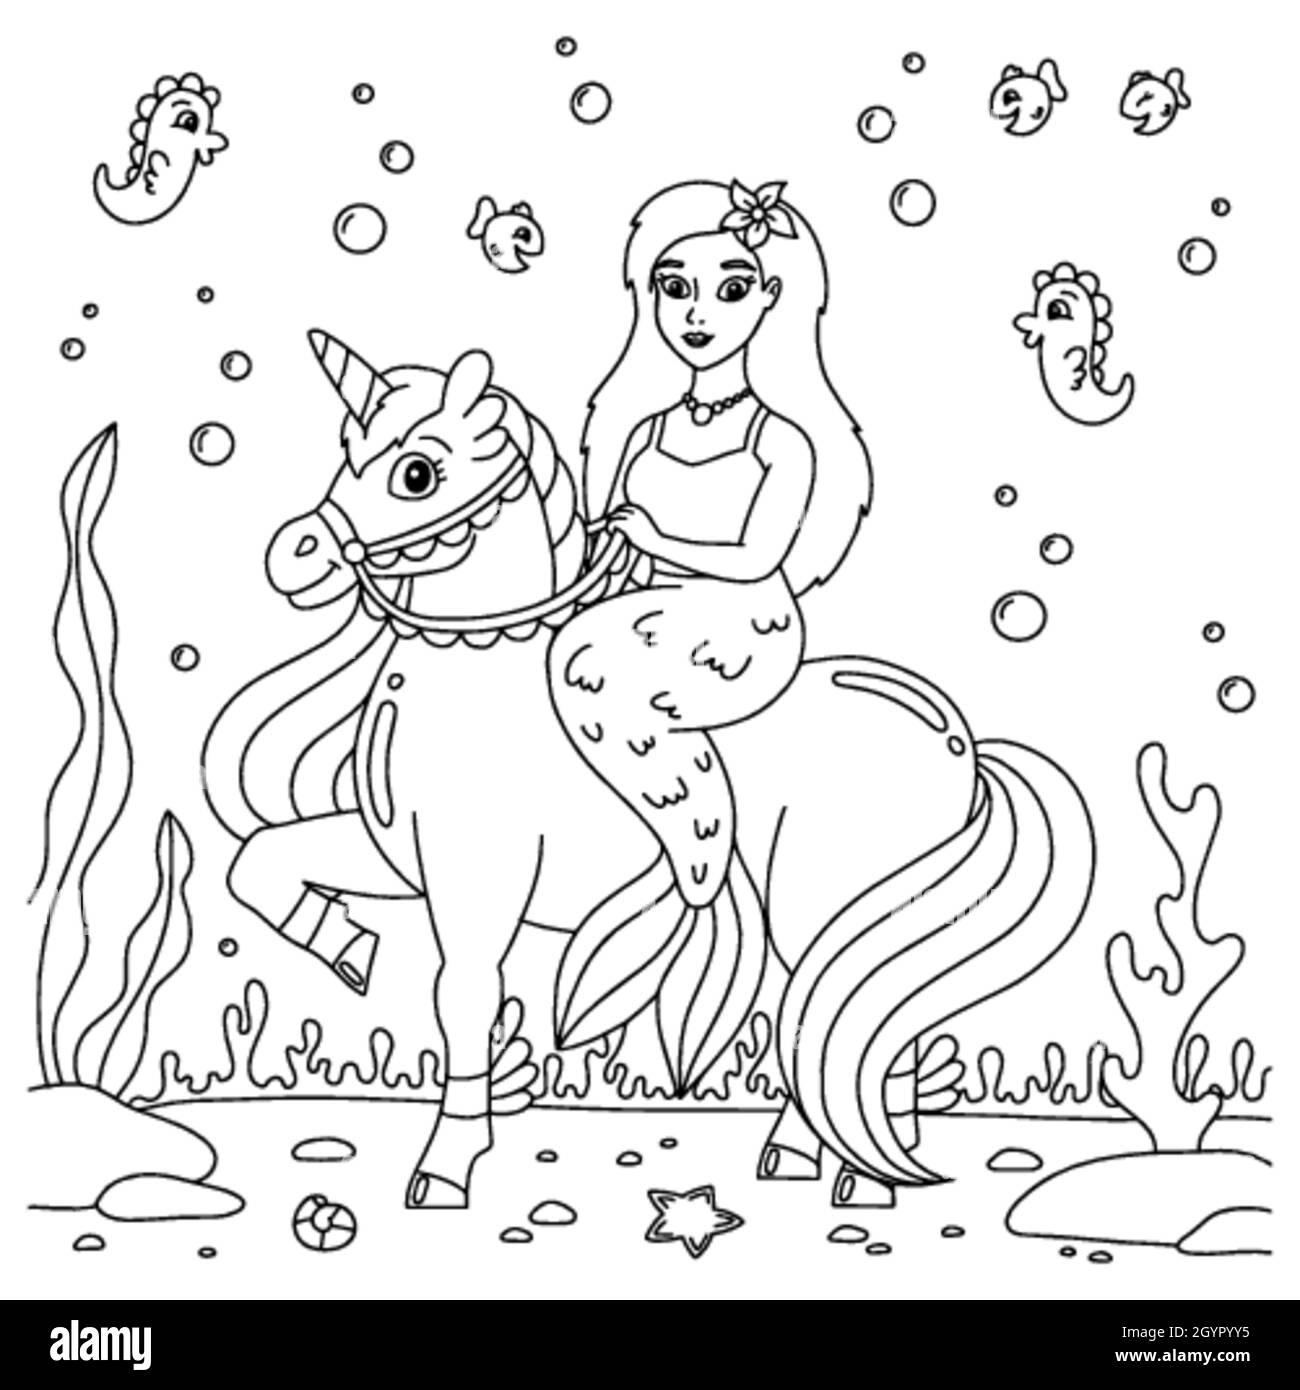 A mermaid rides a unicorn. Coloring book page for kids. Cartoon style character. Vector illustration isolated on white background. Stock Vector